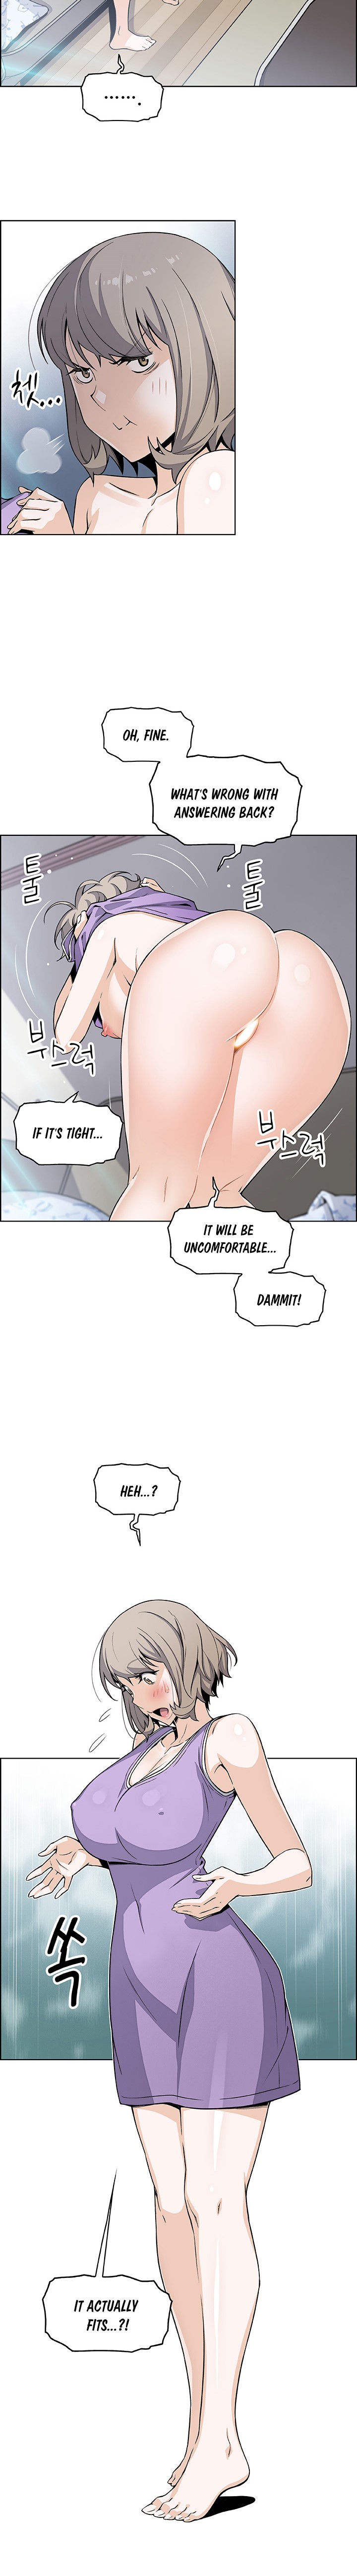 Housekeeper Manhwa - Chapter 35 Page 10